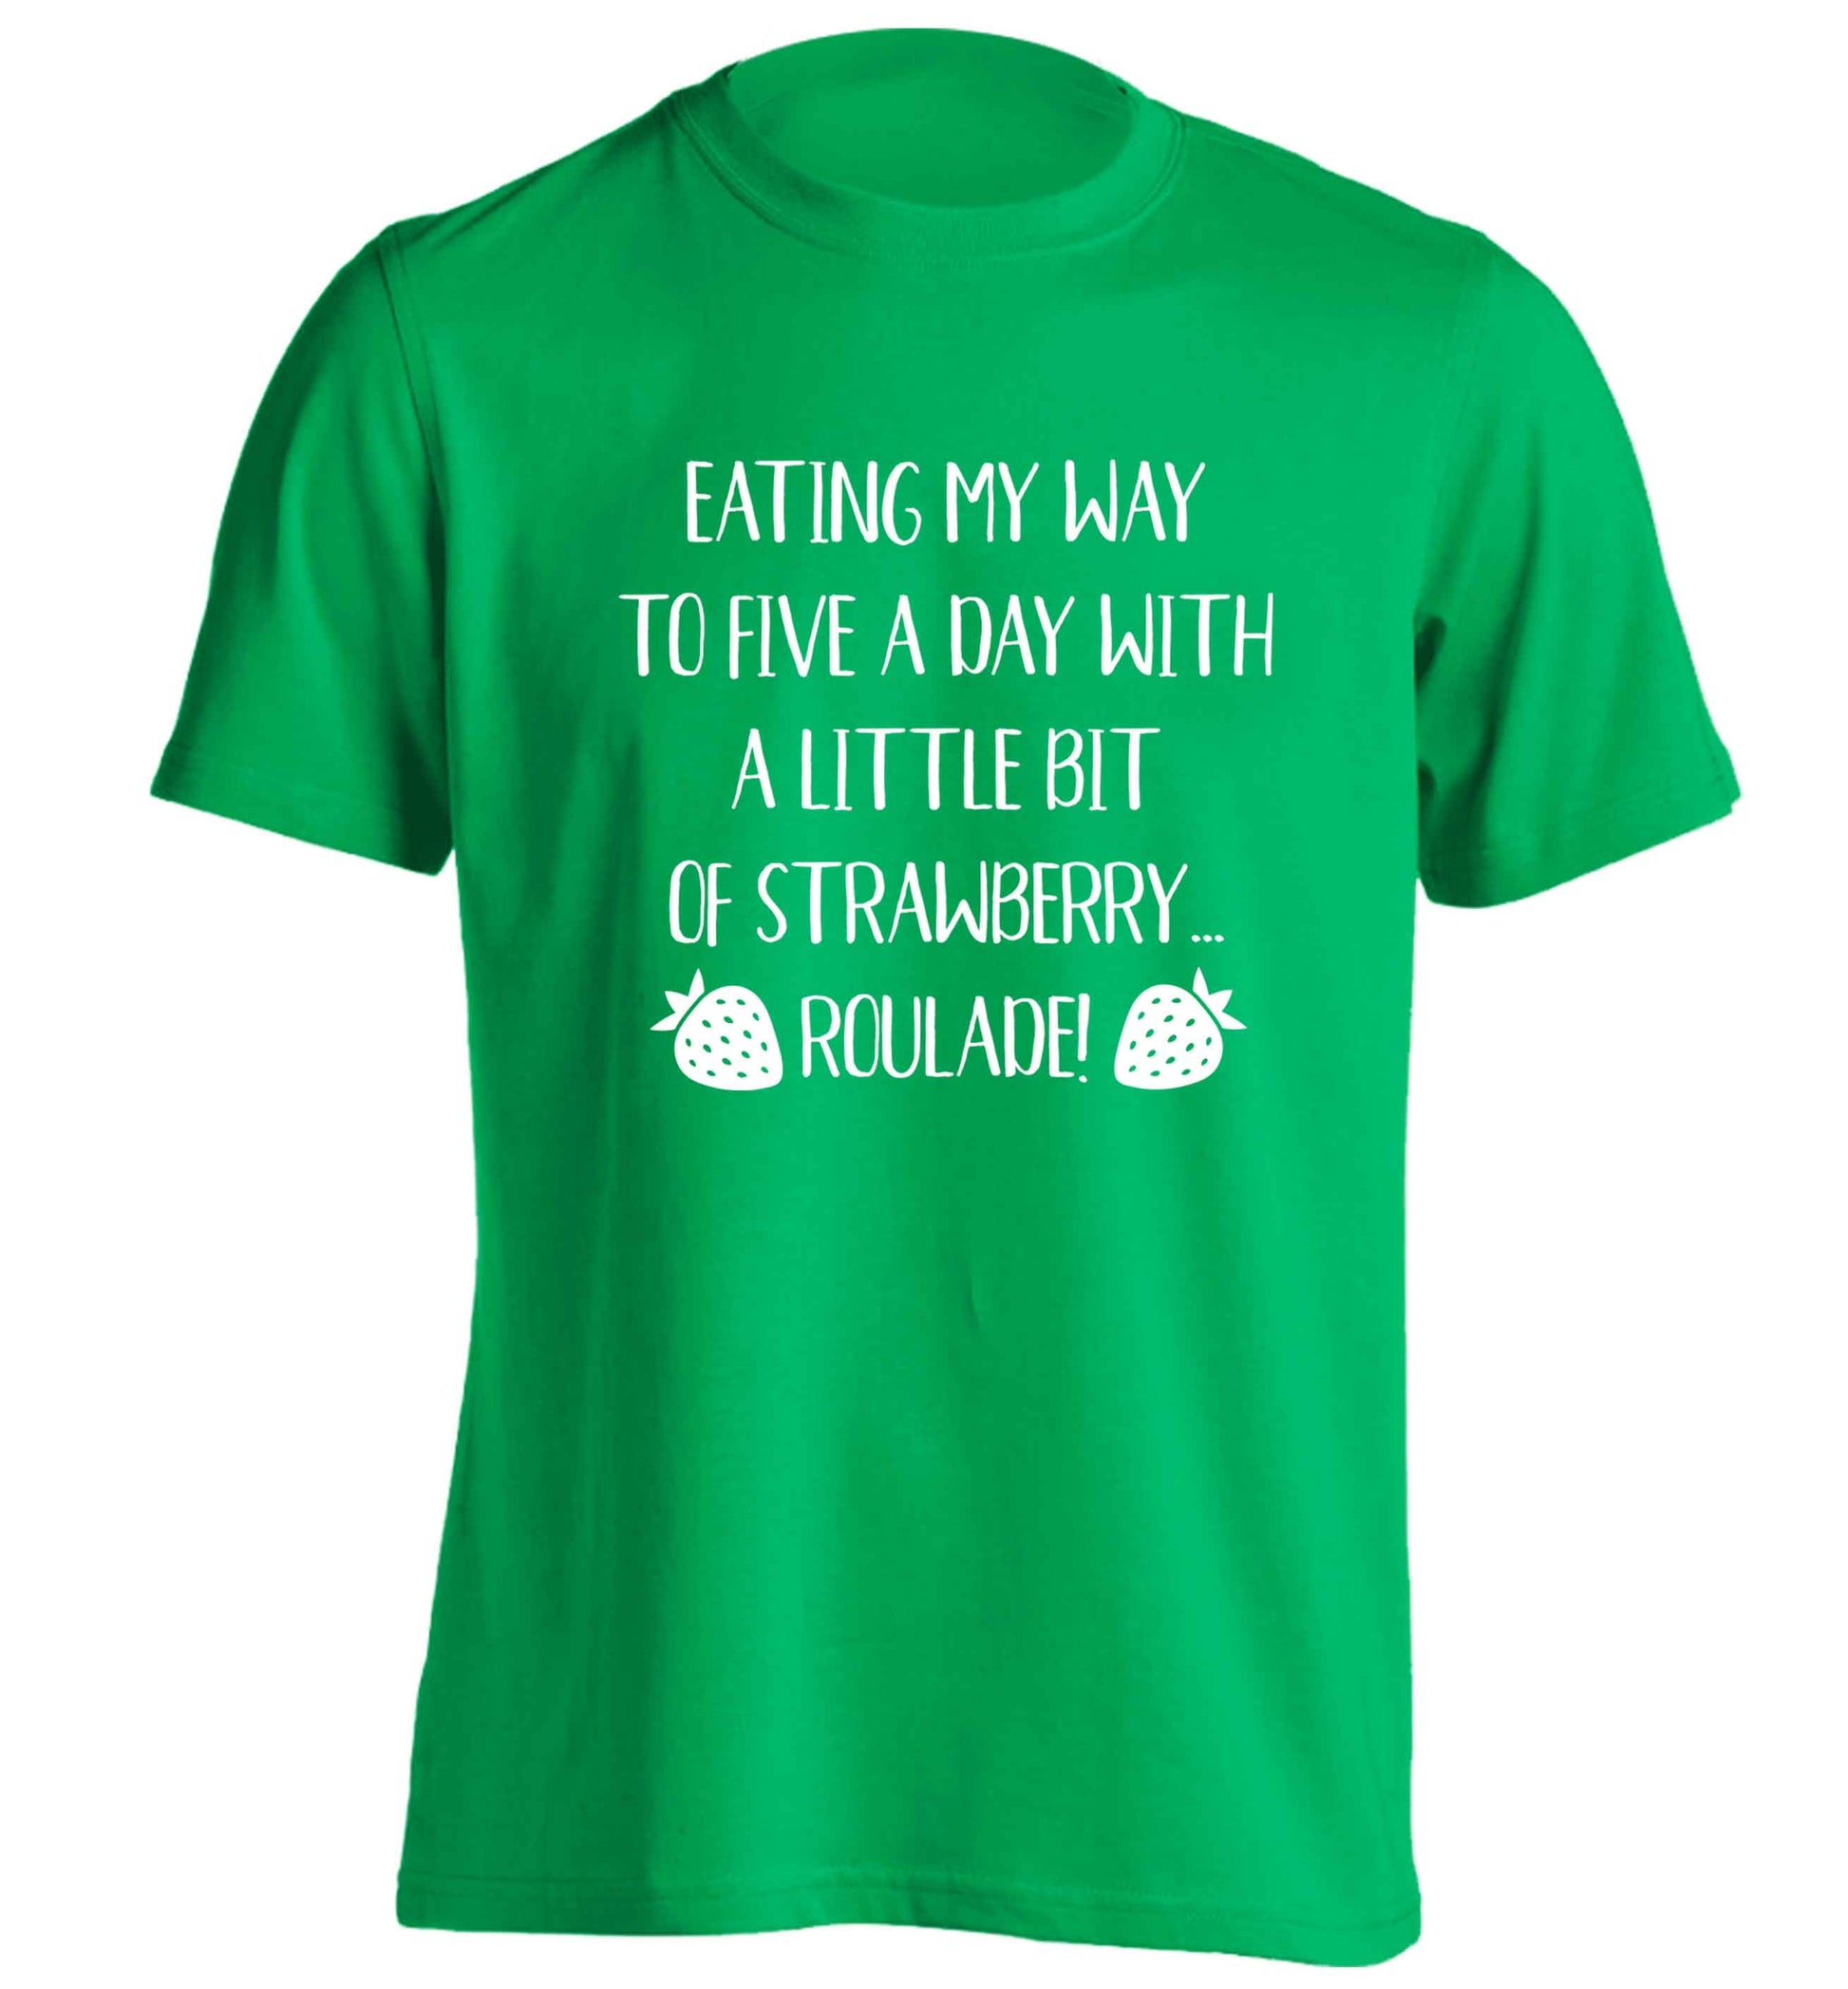 Eating my way to five a day with a little bit of strawberry roulade adults unisex green Tshirt 2XL